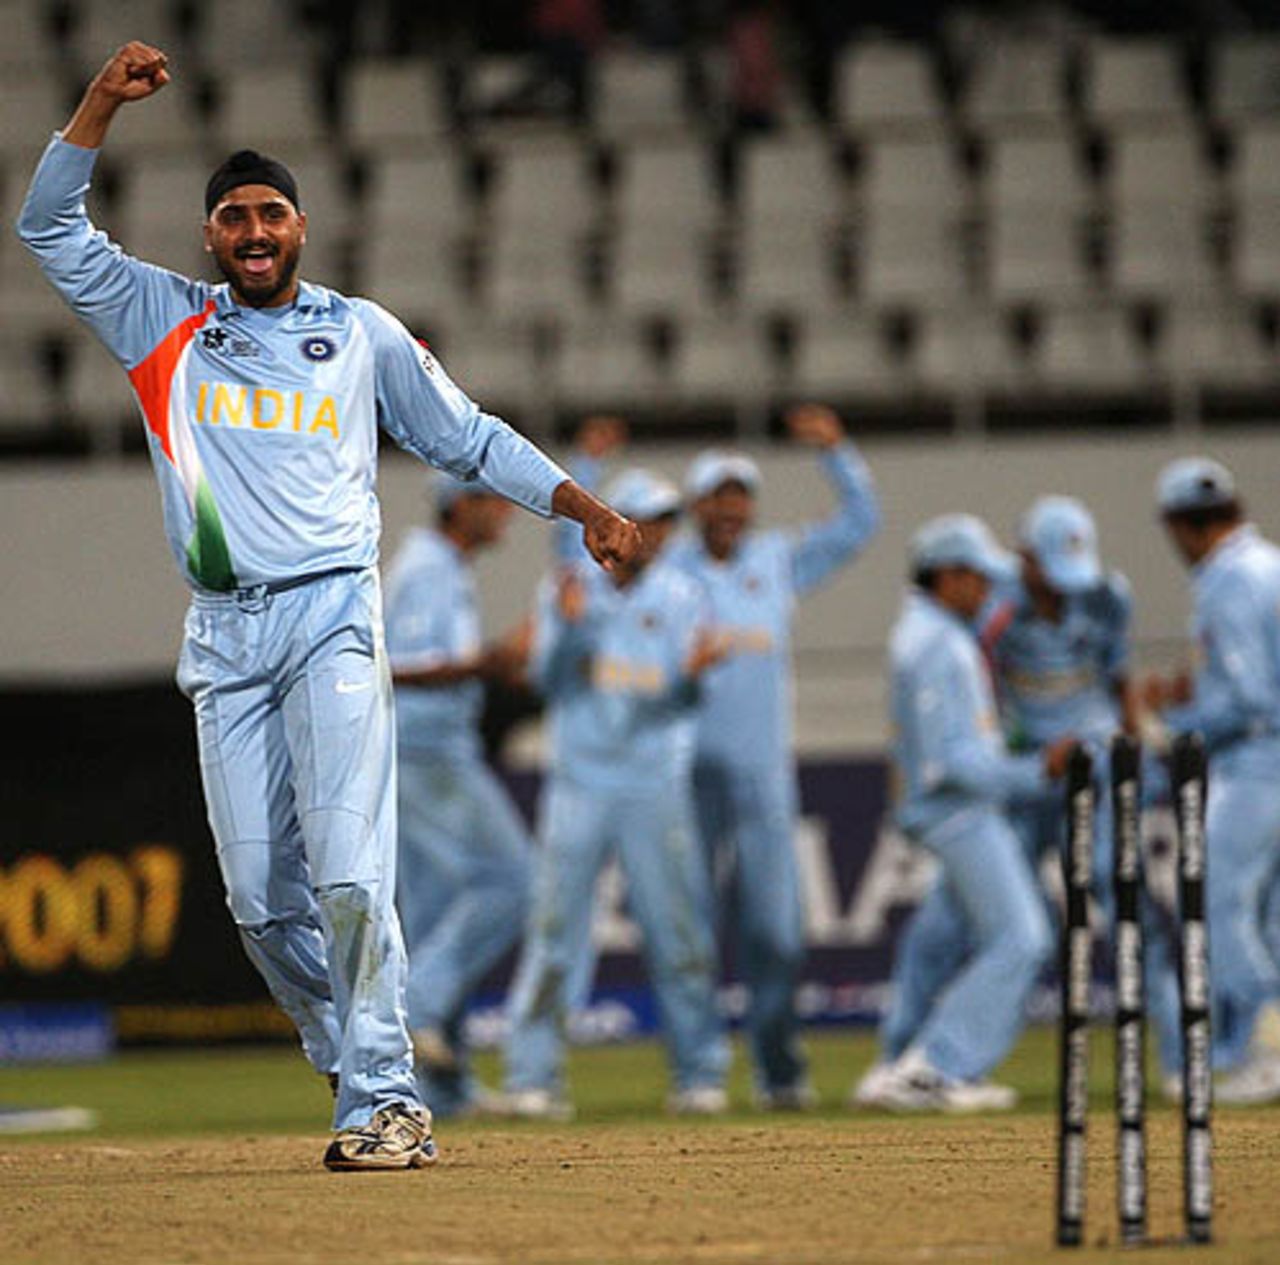 Harbhajan Singh was right on the mark in the bowl-out, India v Pakistan, Group D, ICC World Twenty20, Durban, September 14, 2007 